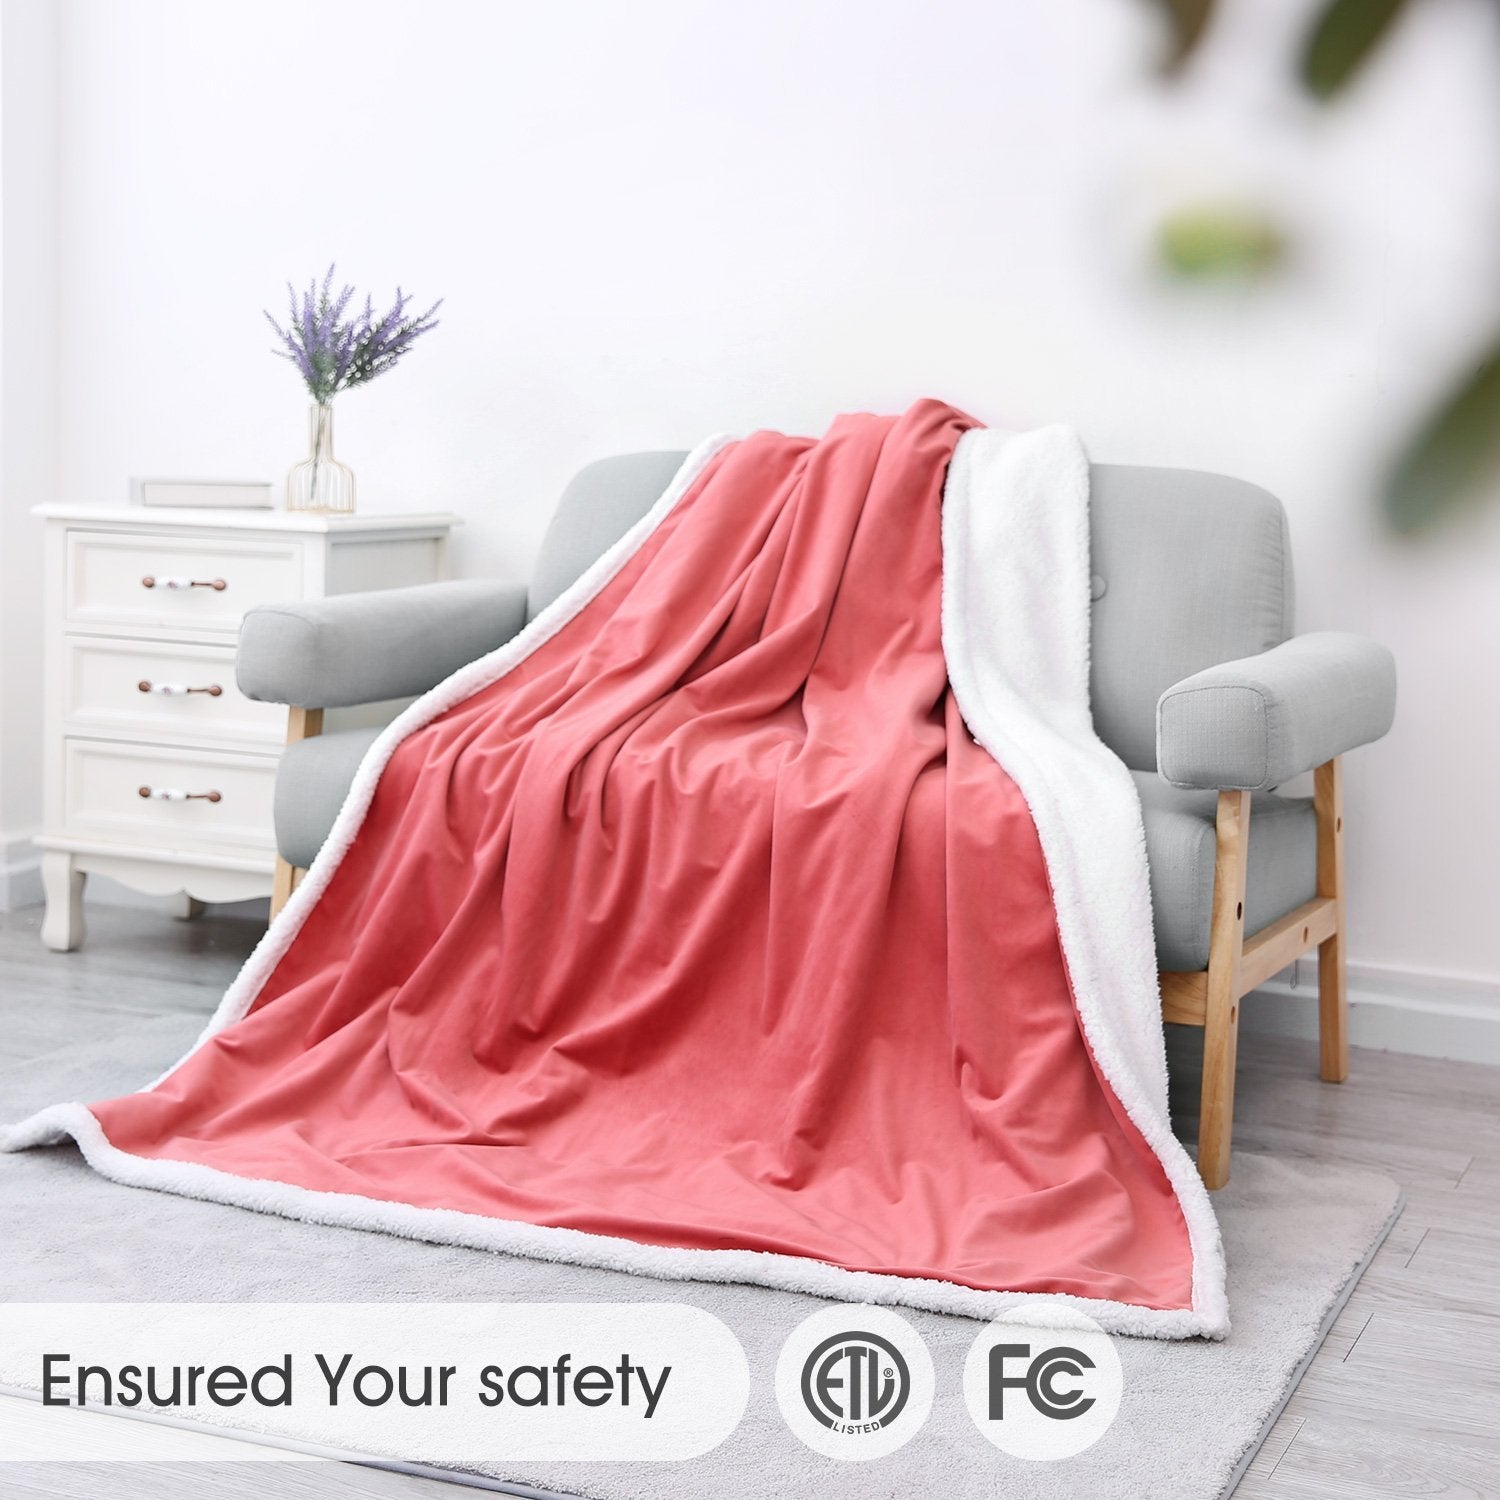 Load image into Gallery viewer, Heated Blanket Electric Throws Lightweight Soft Double-Layer Plush Blanket, 3 Heat Settings, Fast Heating, 2H Auto Off, 50&quot; x 60&quot; Pink, Travel Home Office Use, Machine Washable - NAIPO
